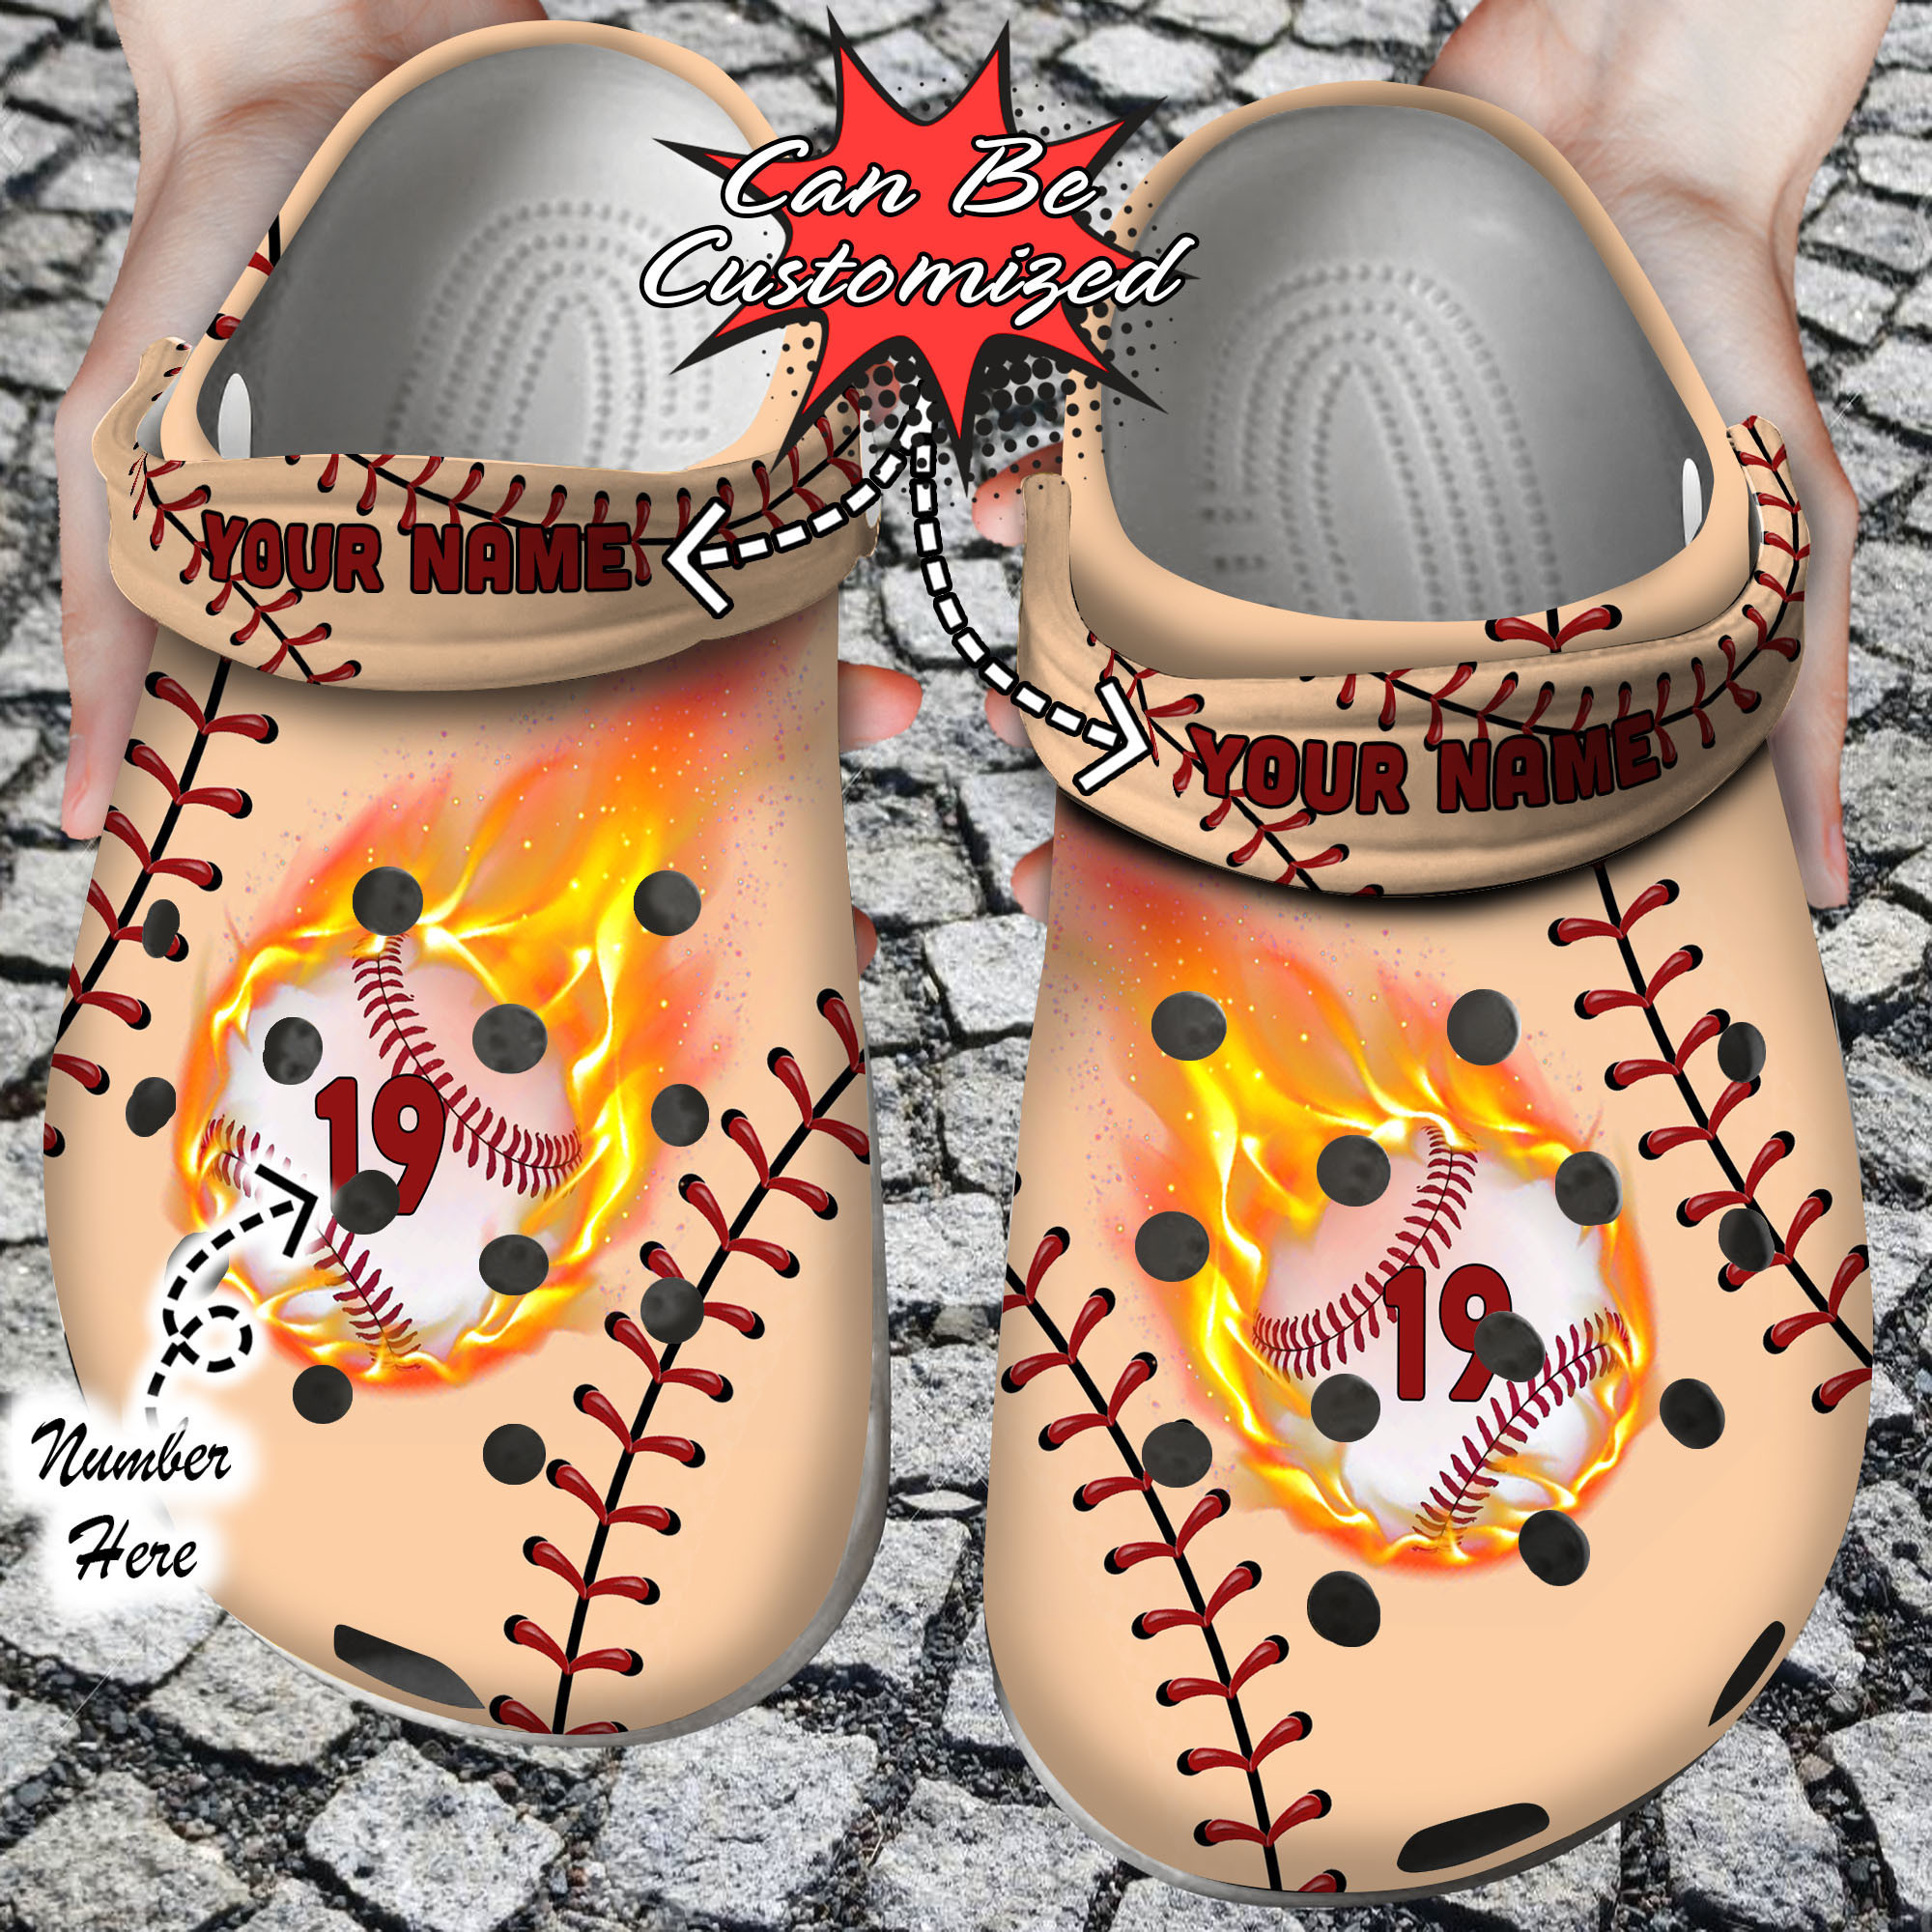 Sport Crocs Personalized Baseball On Fire Clog Shoes